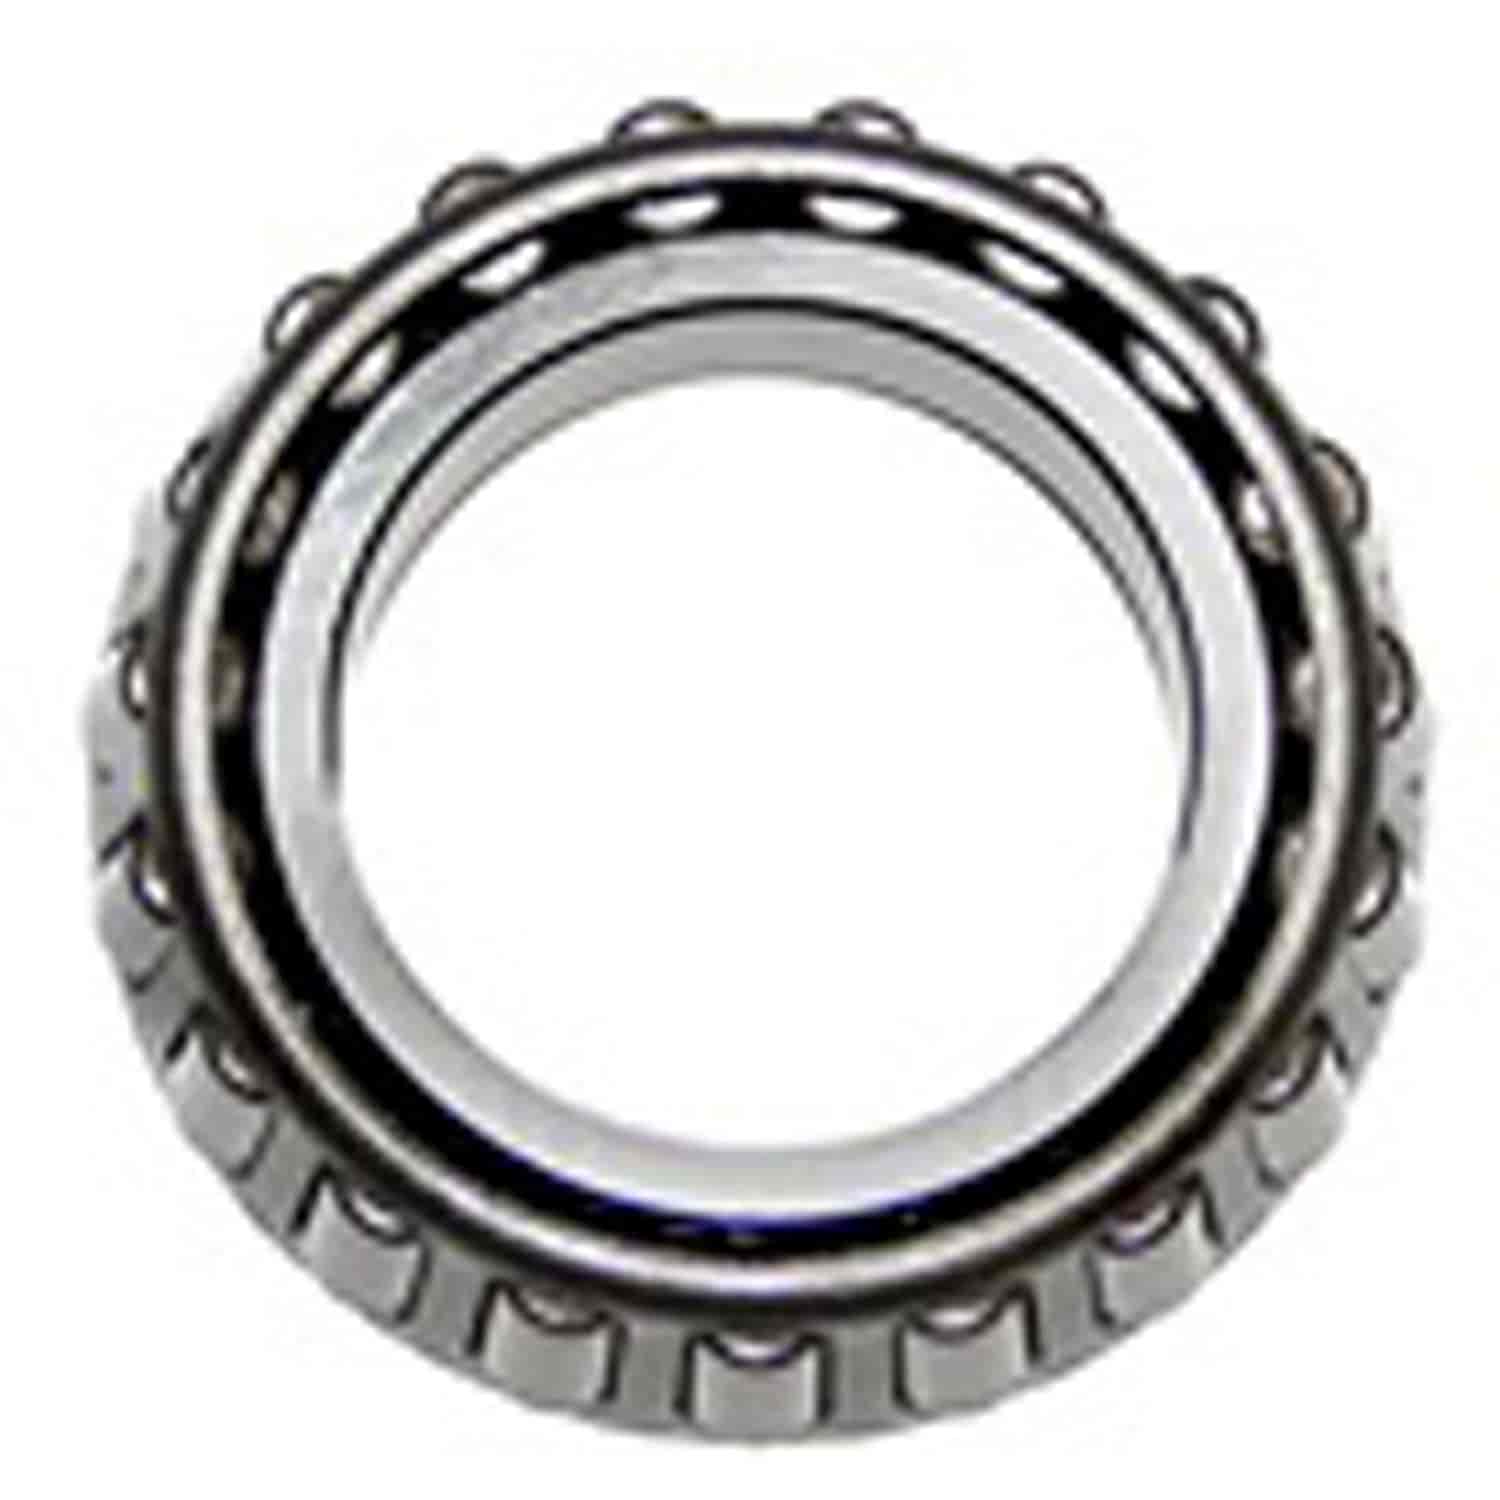 This front wheel bearing cone from Omix-ADA fits 41-66 Willys and Jeep models with Dana 25 front axl